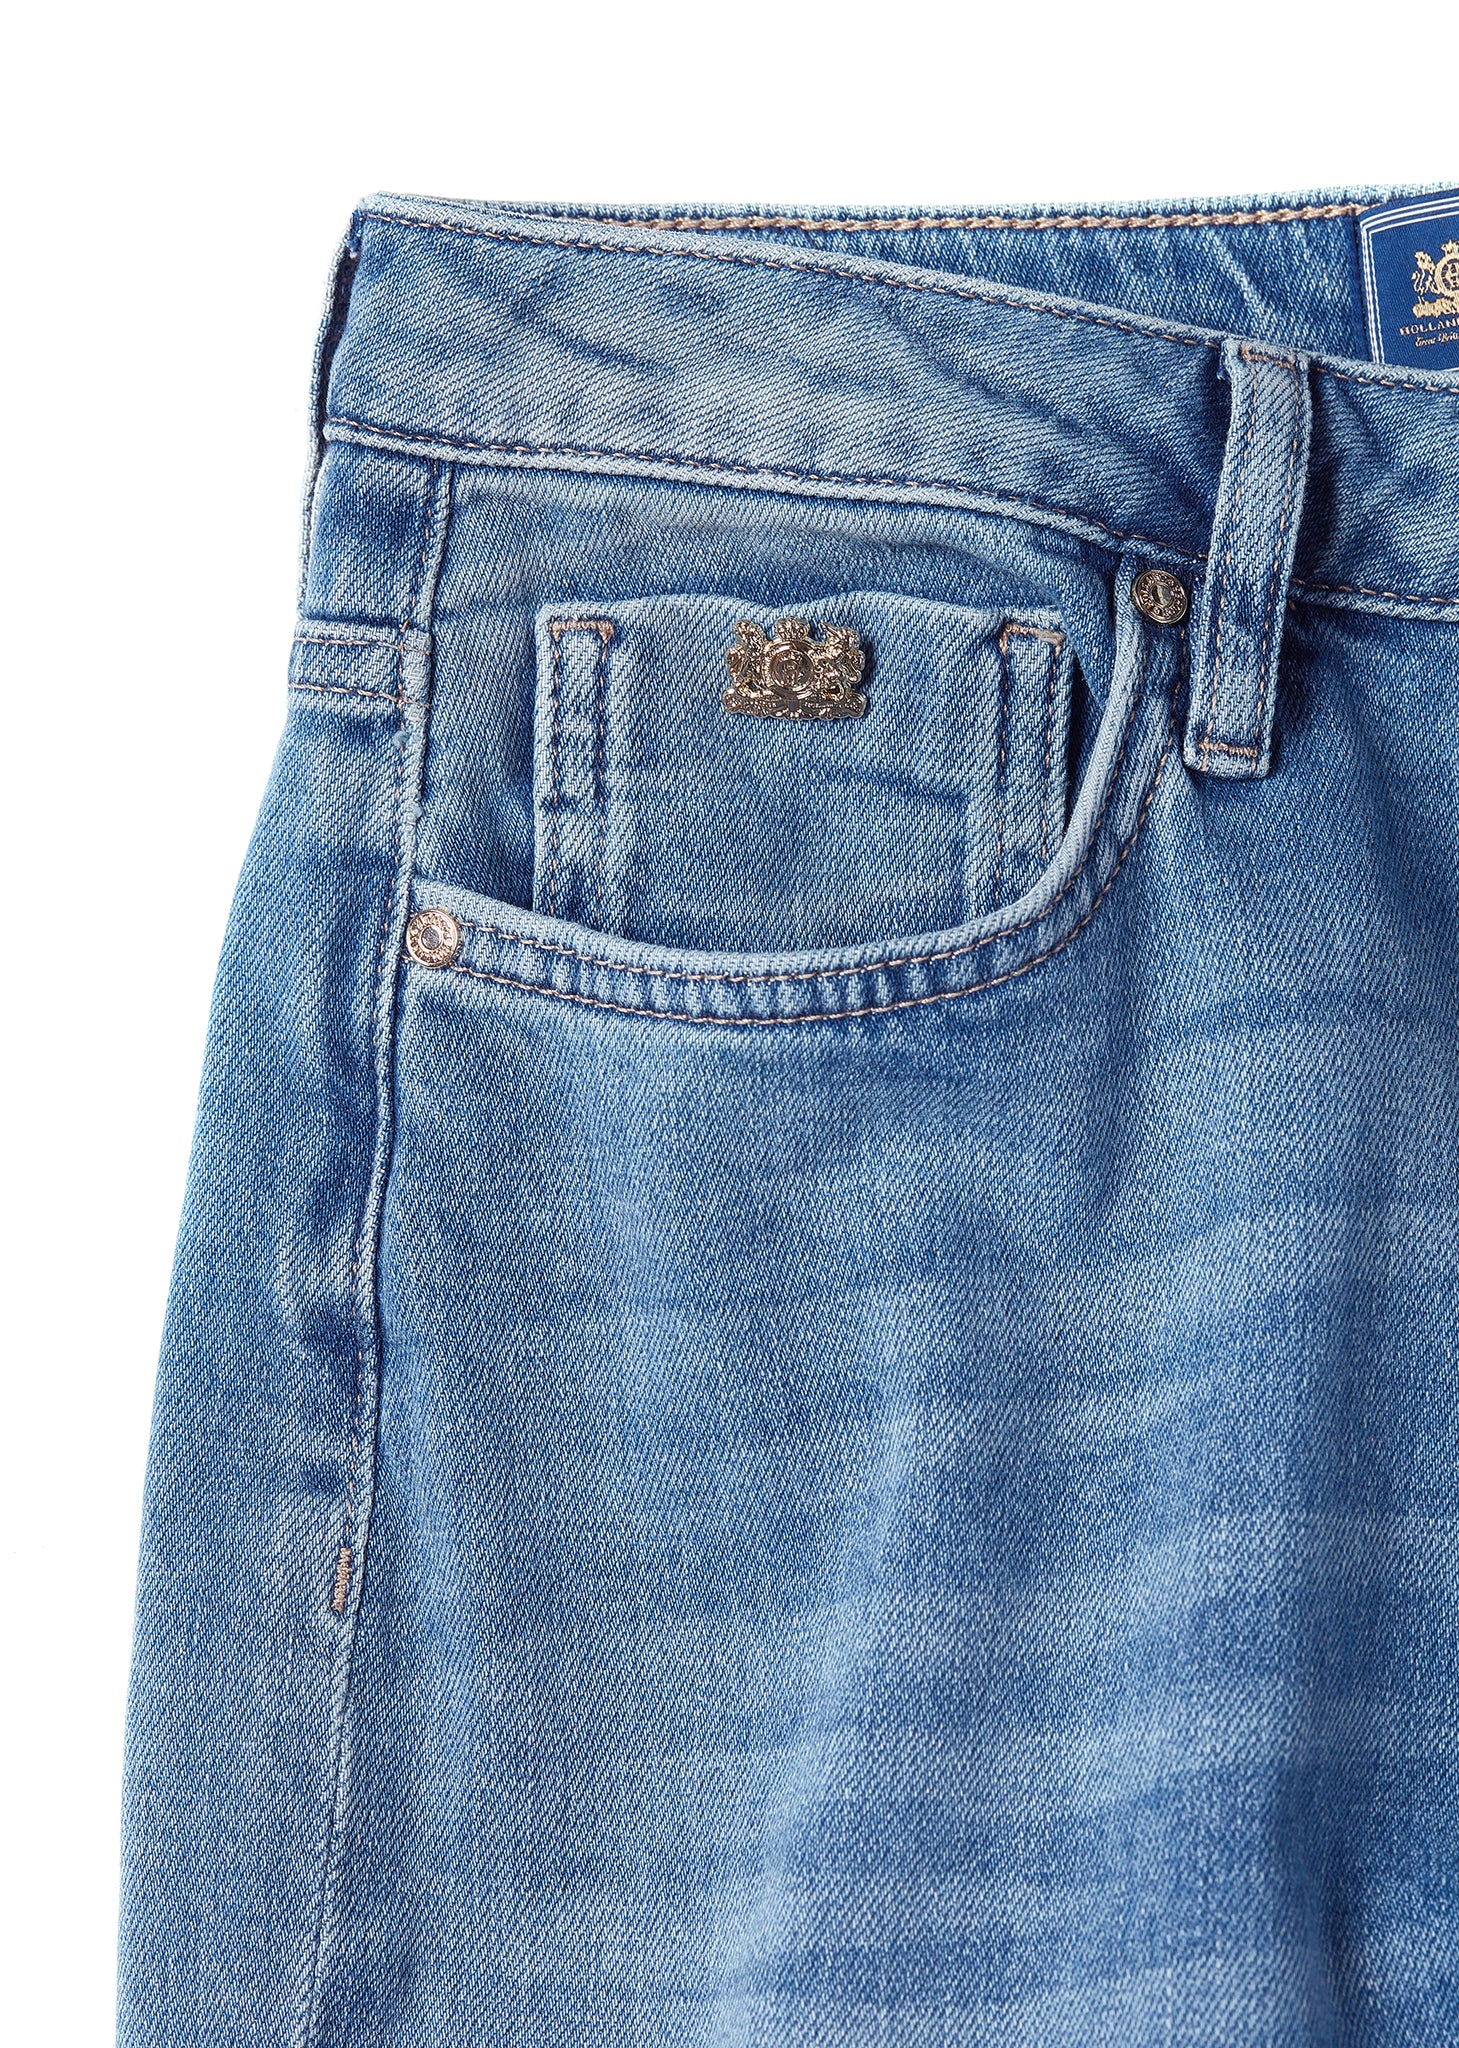 front pocket detail on womens high rise blue denim jogger style slim fit jean with cuffed ankles and two open pockets to the front and back 